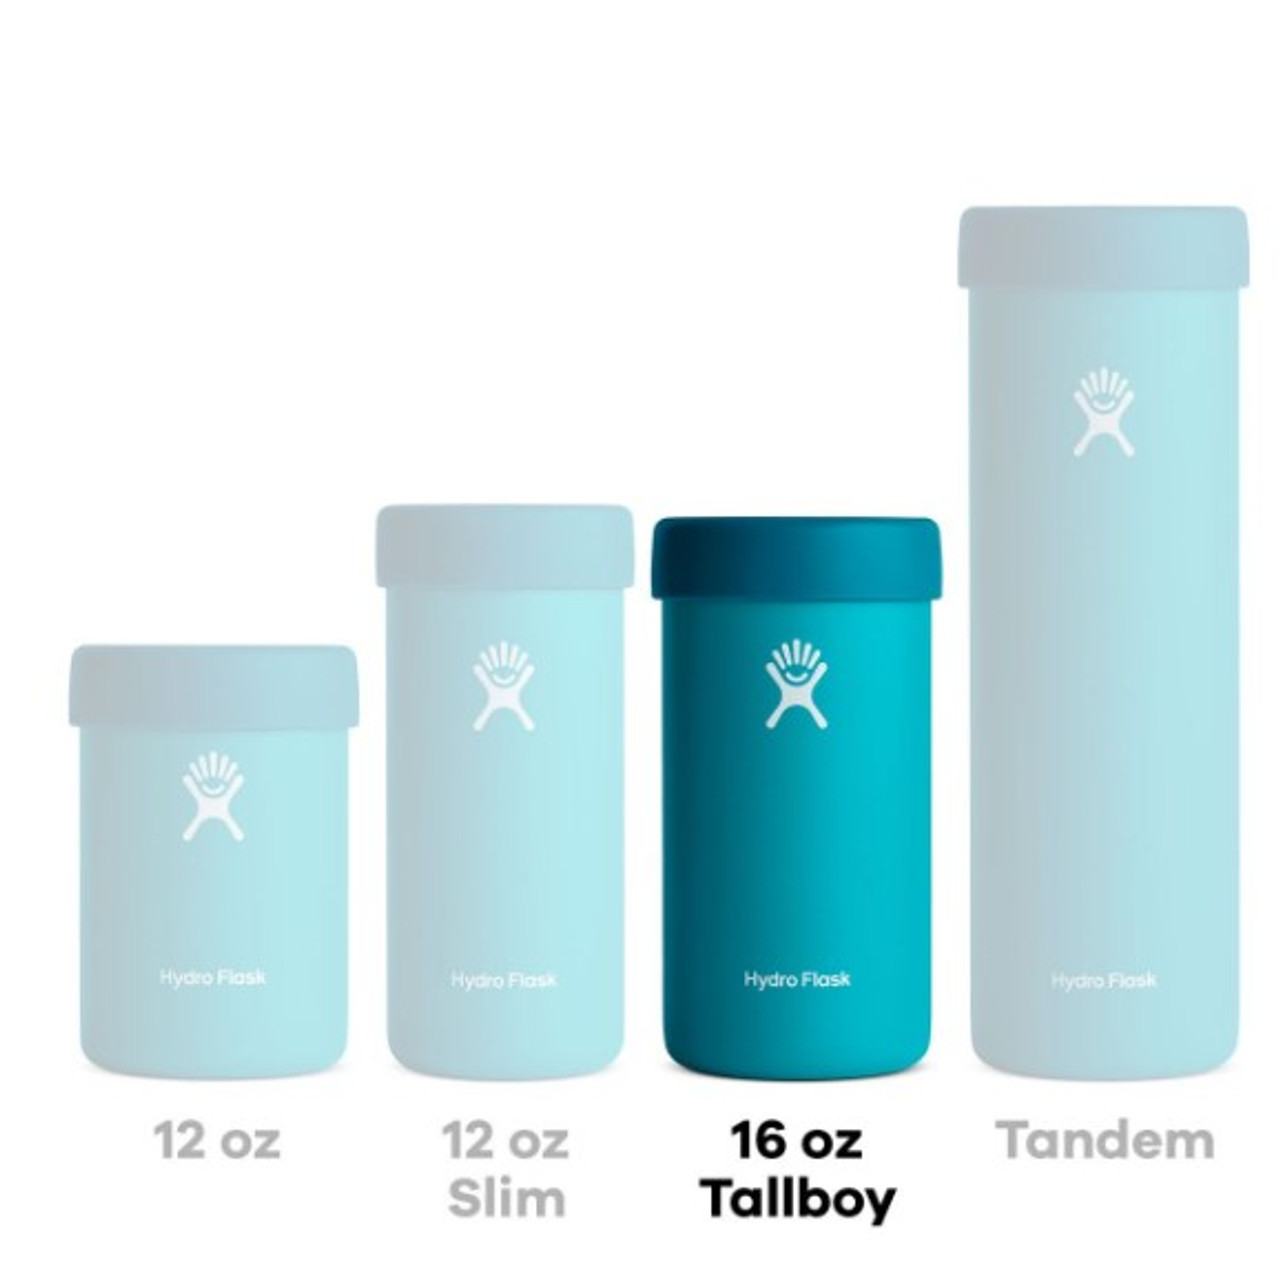 https://cdn11.bigcommerce.com/s-s7ib93jl4n/images/stencil/1280x1280/products/49661/65550/Hydro-flask-16oz-Tallboy-Cooler-Cup-size__59881.1658510027.jpg?c=2?imbypass=on